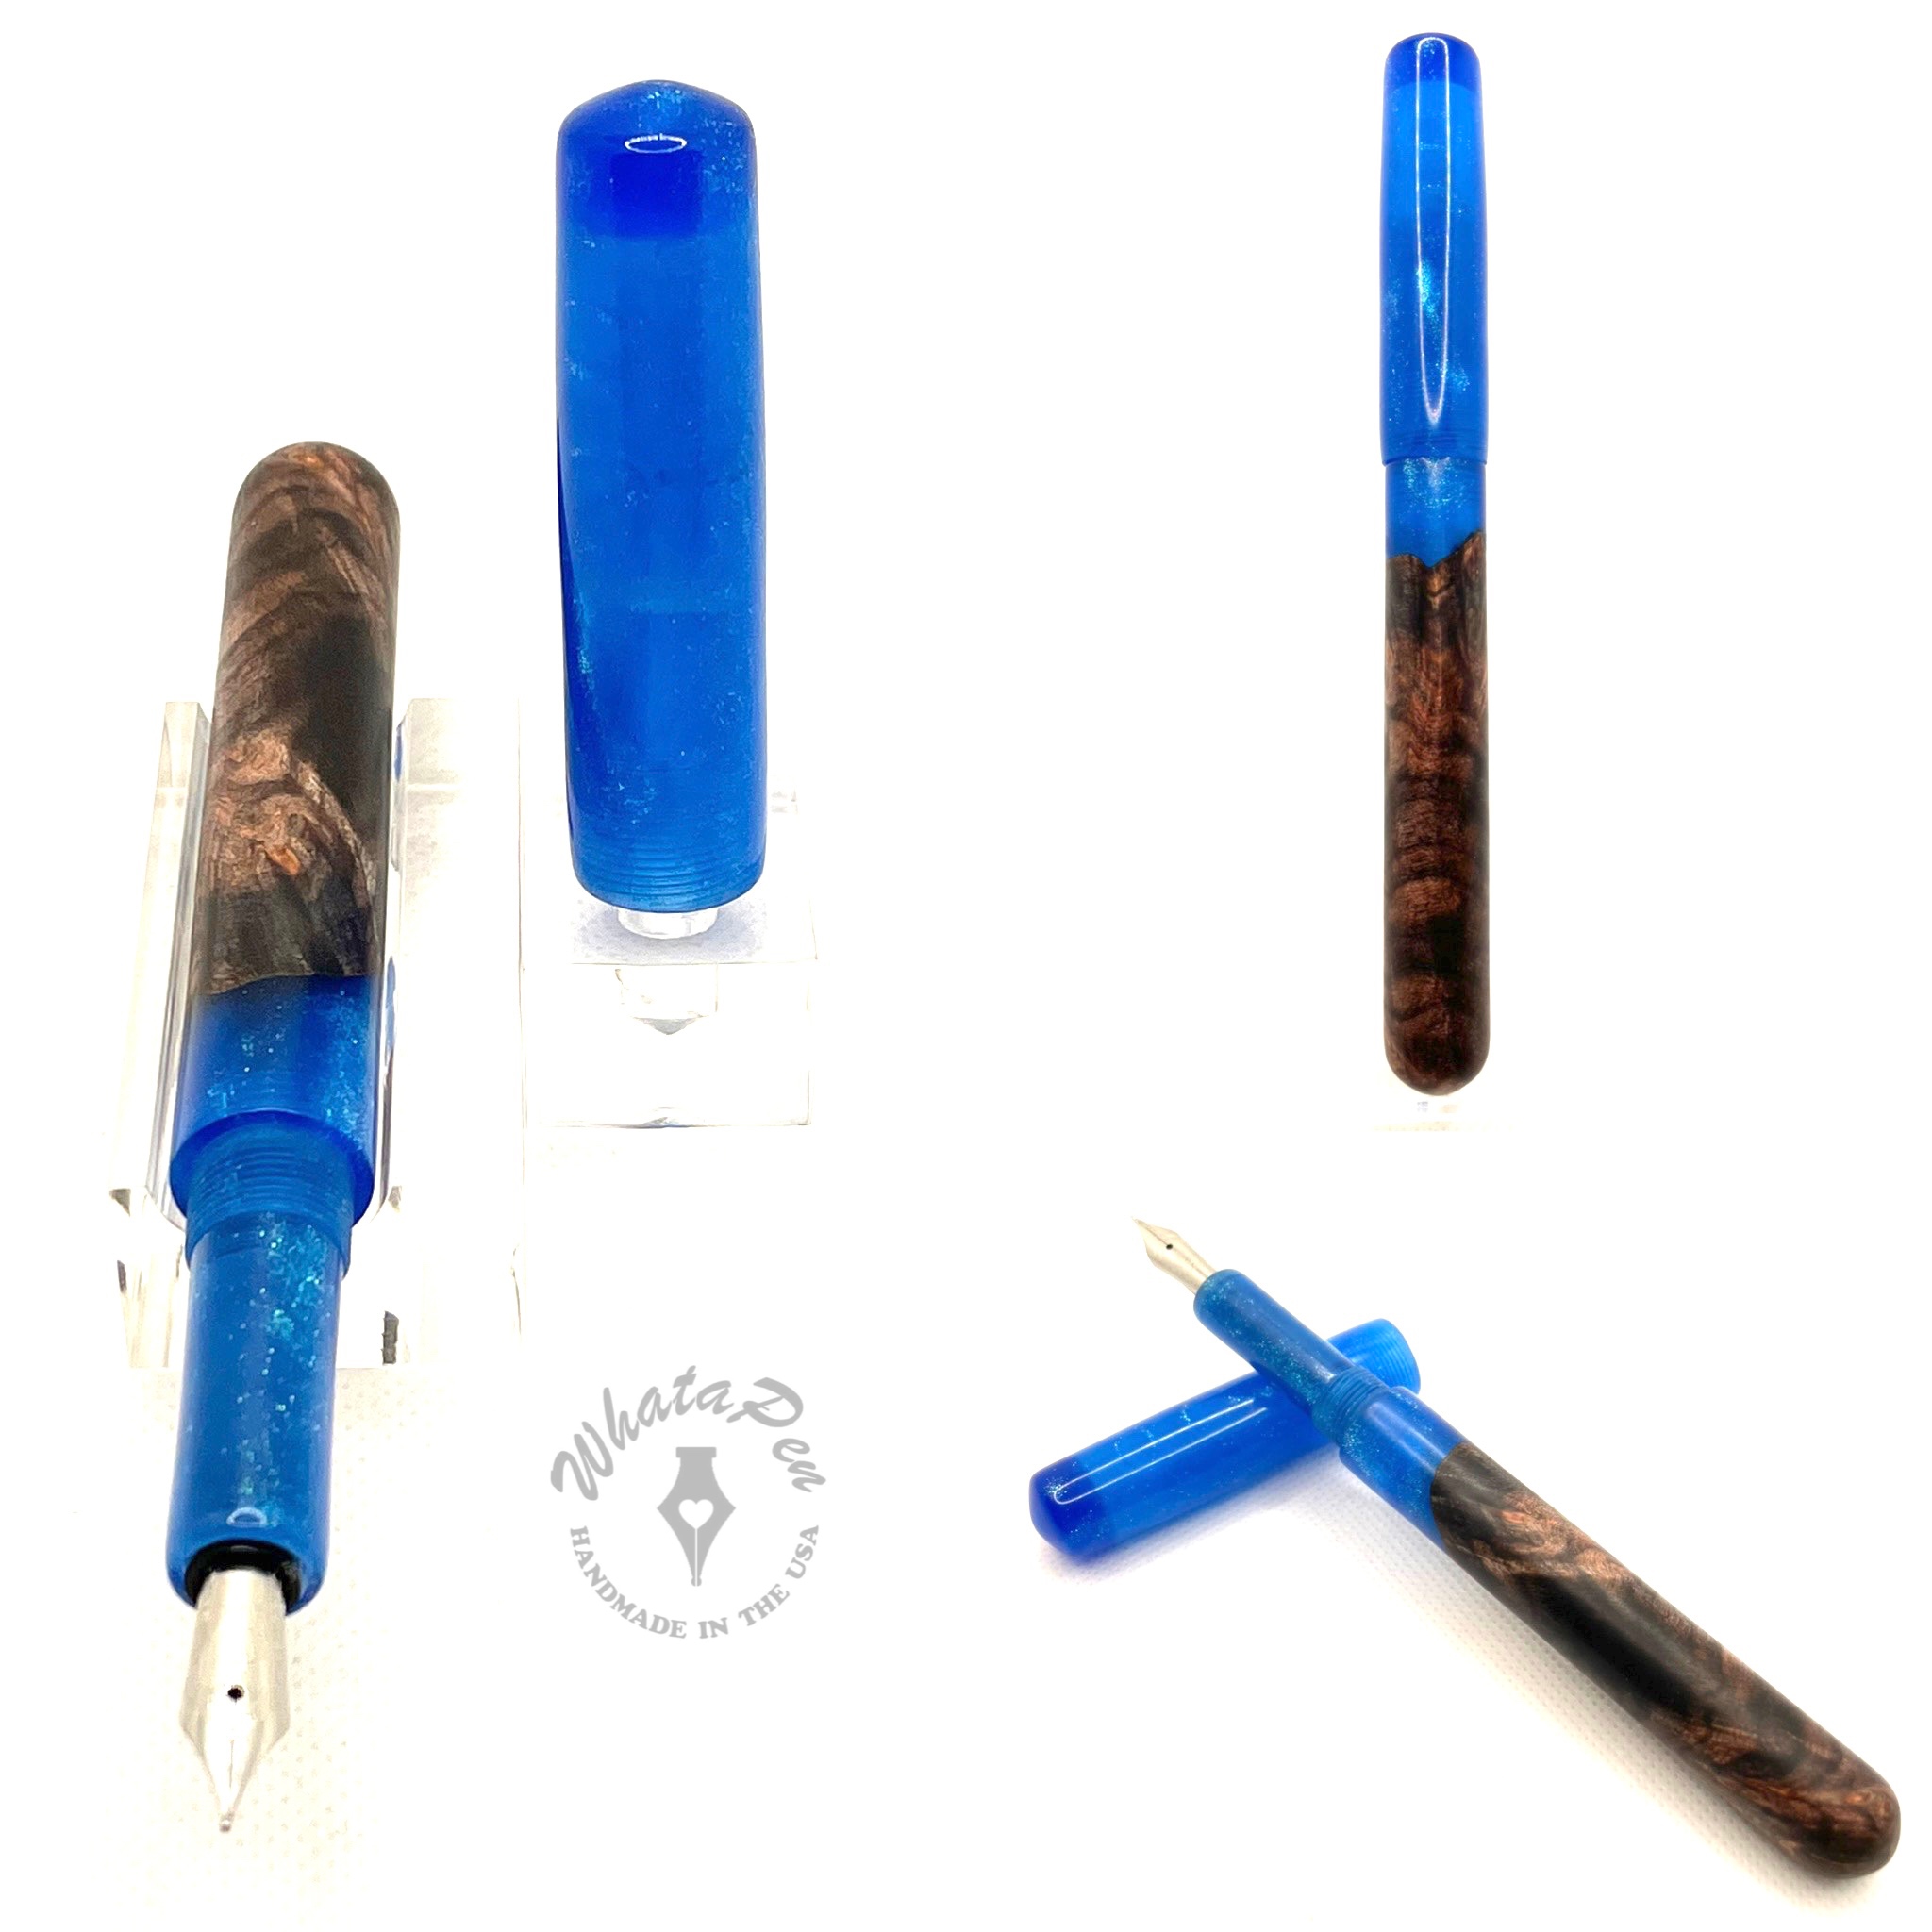 Pens and Pencils: : WhataPen: #5 Bock Fountain Kitless